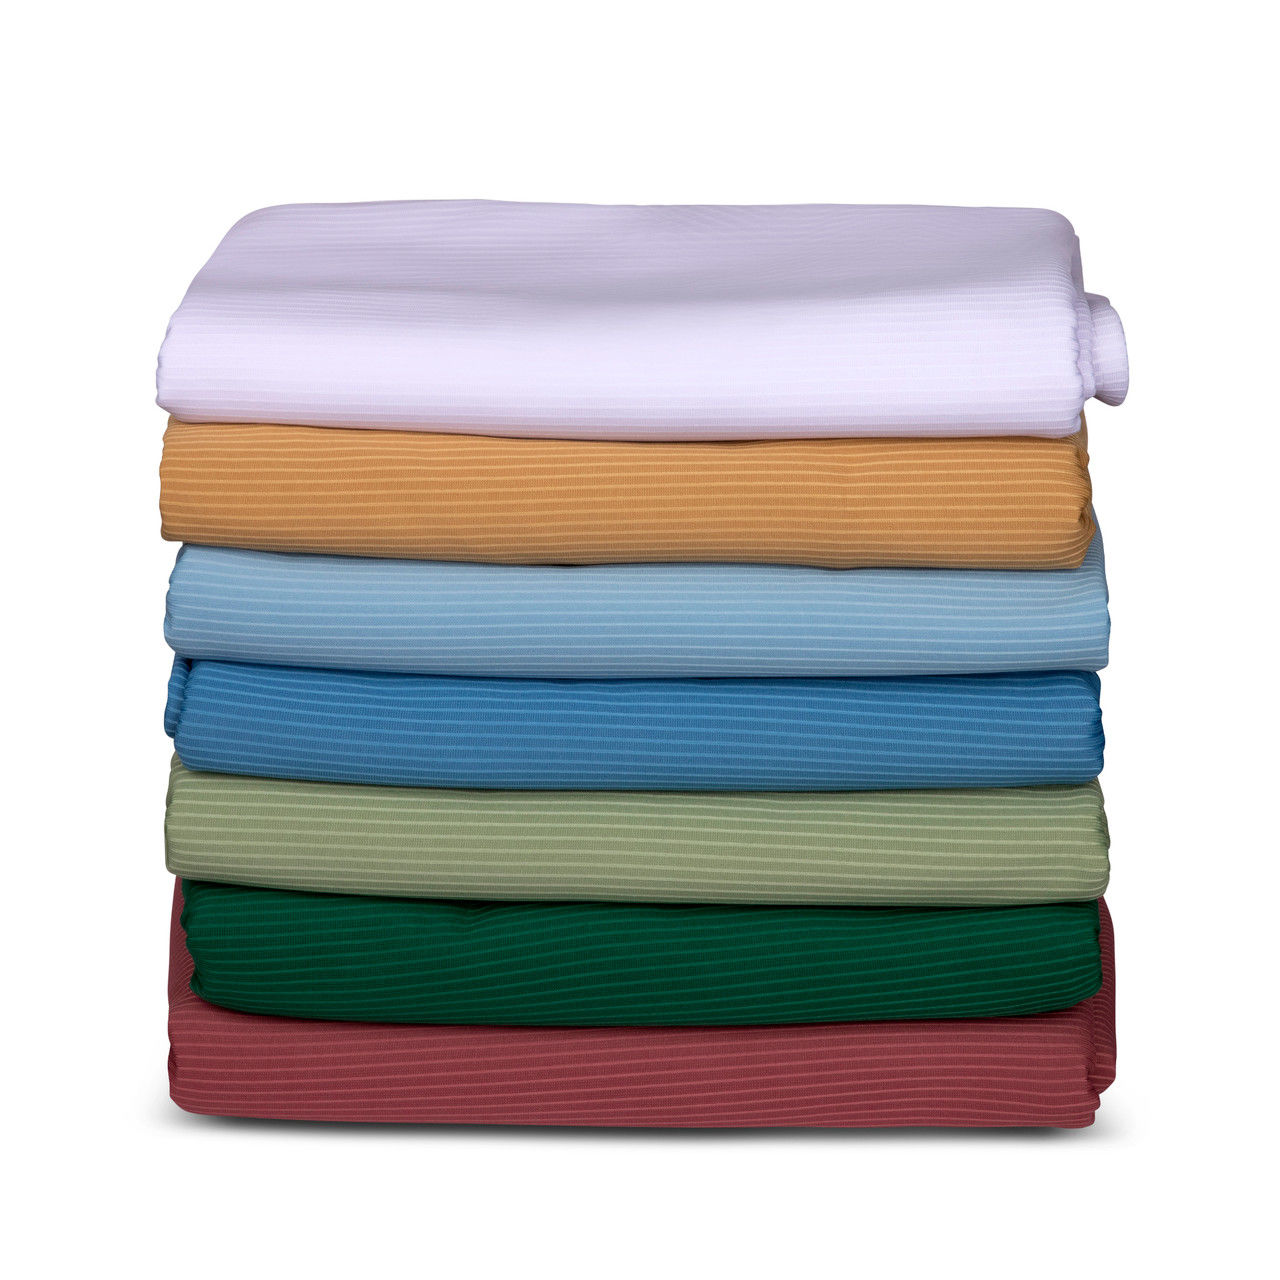 What is the intended use of the ribcord bedspread twin from Concord Ribcord Bedspreads?